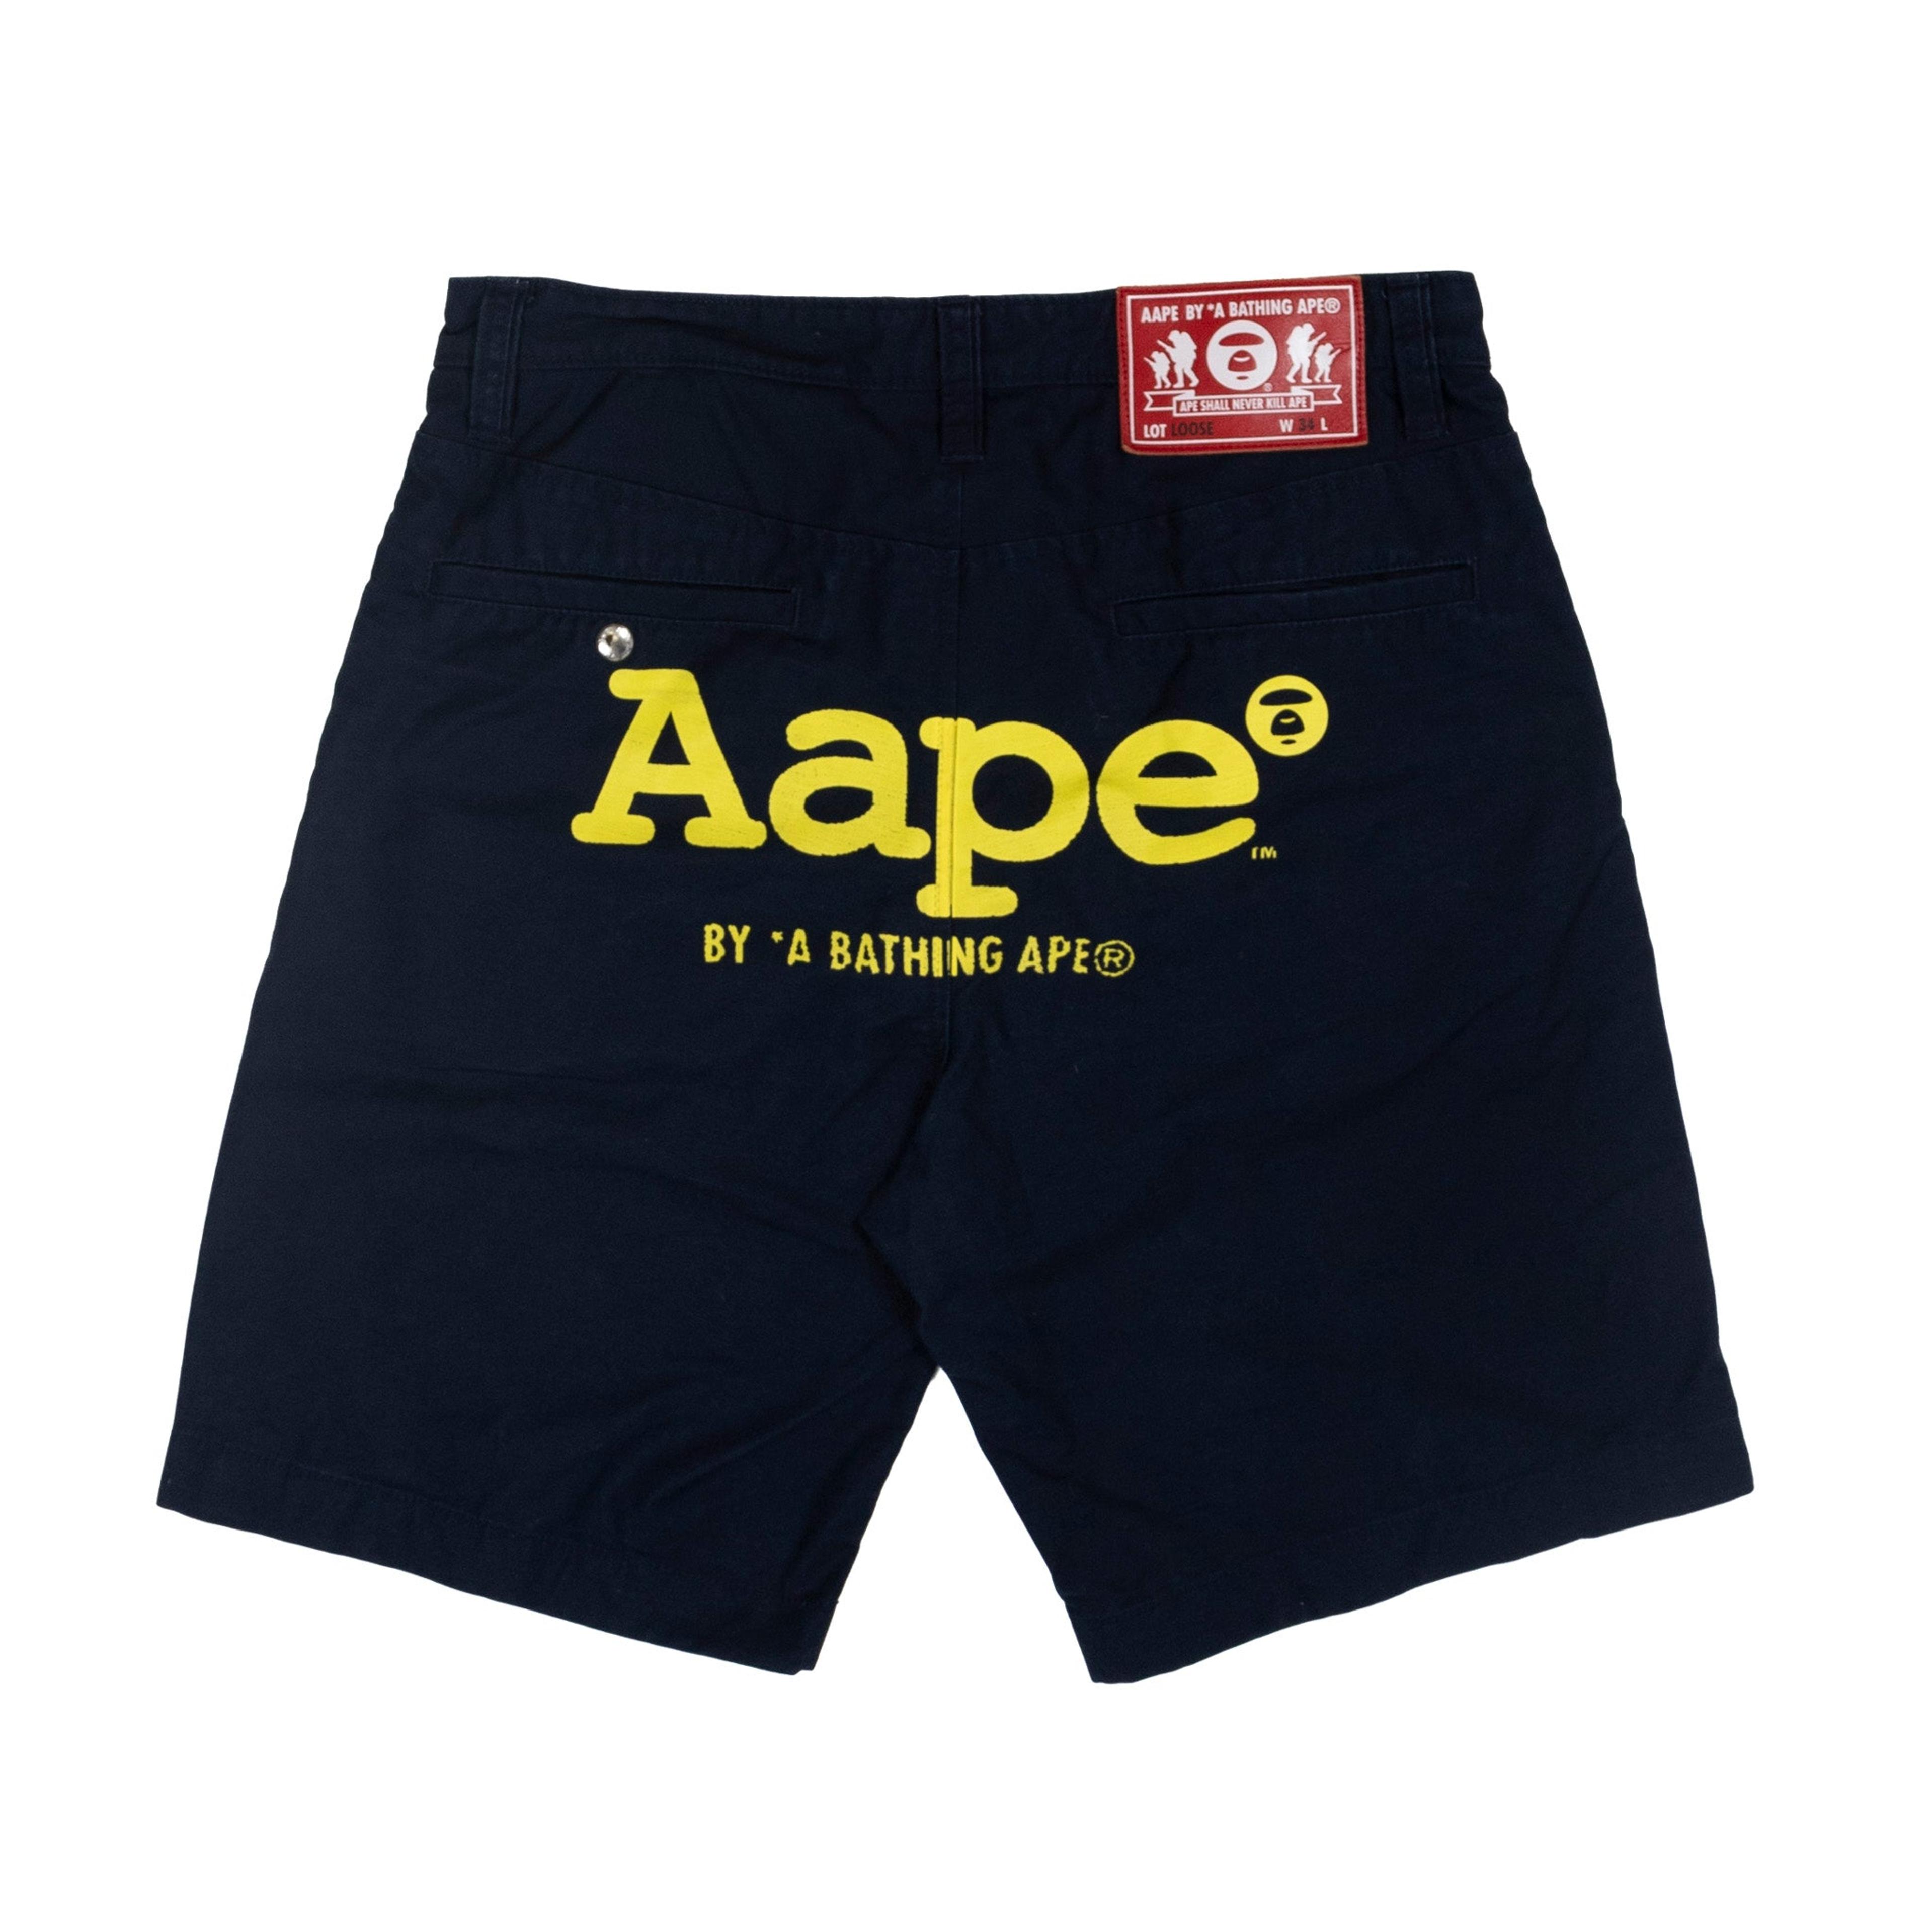 Alternate View 4 of Aape by A Bathing Ape Summer Shorts